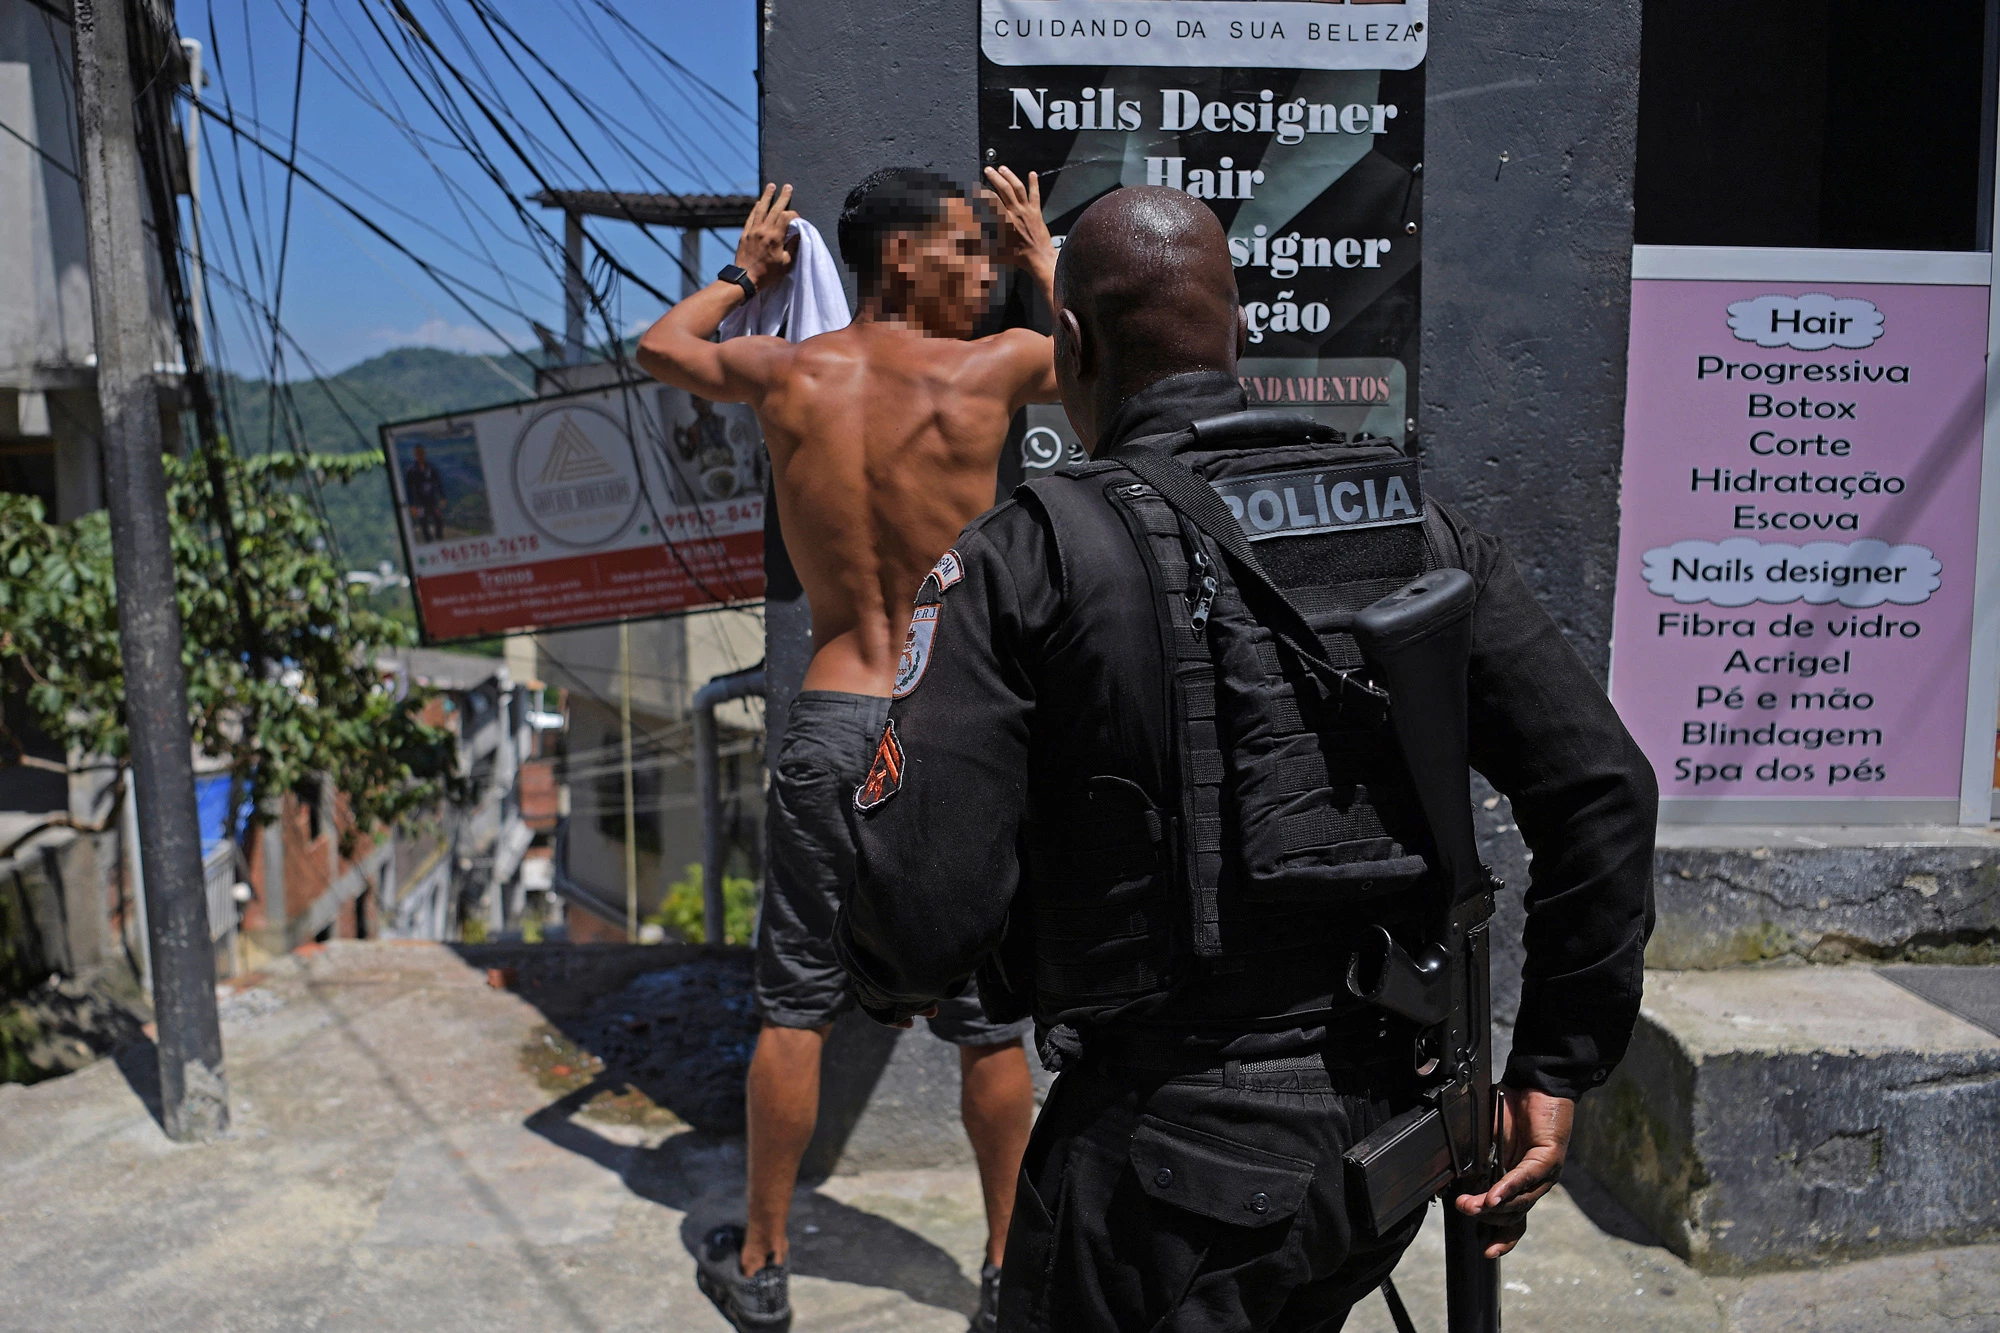 A member of the Brazilian Military Police stops a suspect during a large scale operation against drug trafficking and militias, to occupy and secure parts of the Morro do Banco favela in Rio de Janeiro, Brazil, on January 20, 2022. (Photo by CARL DE SOUZA / AFP) (Photo by CARL DE SOUZA/AFP via Getty Images)